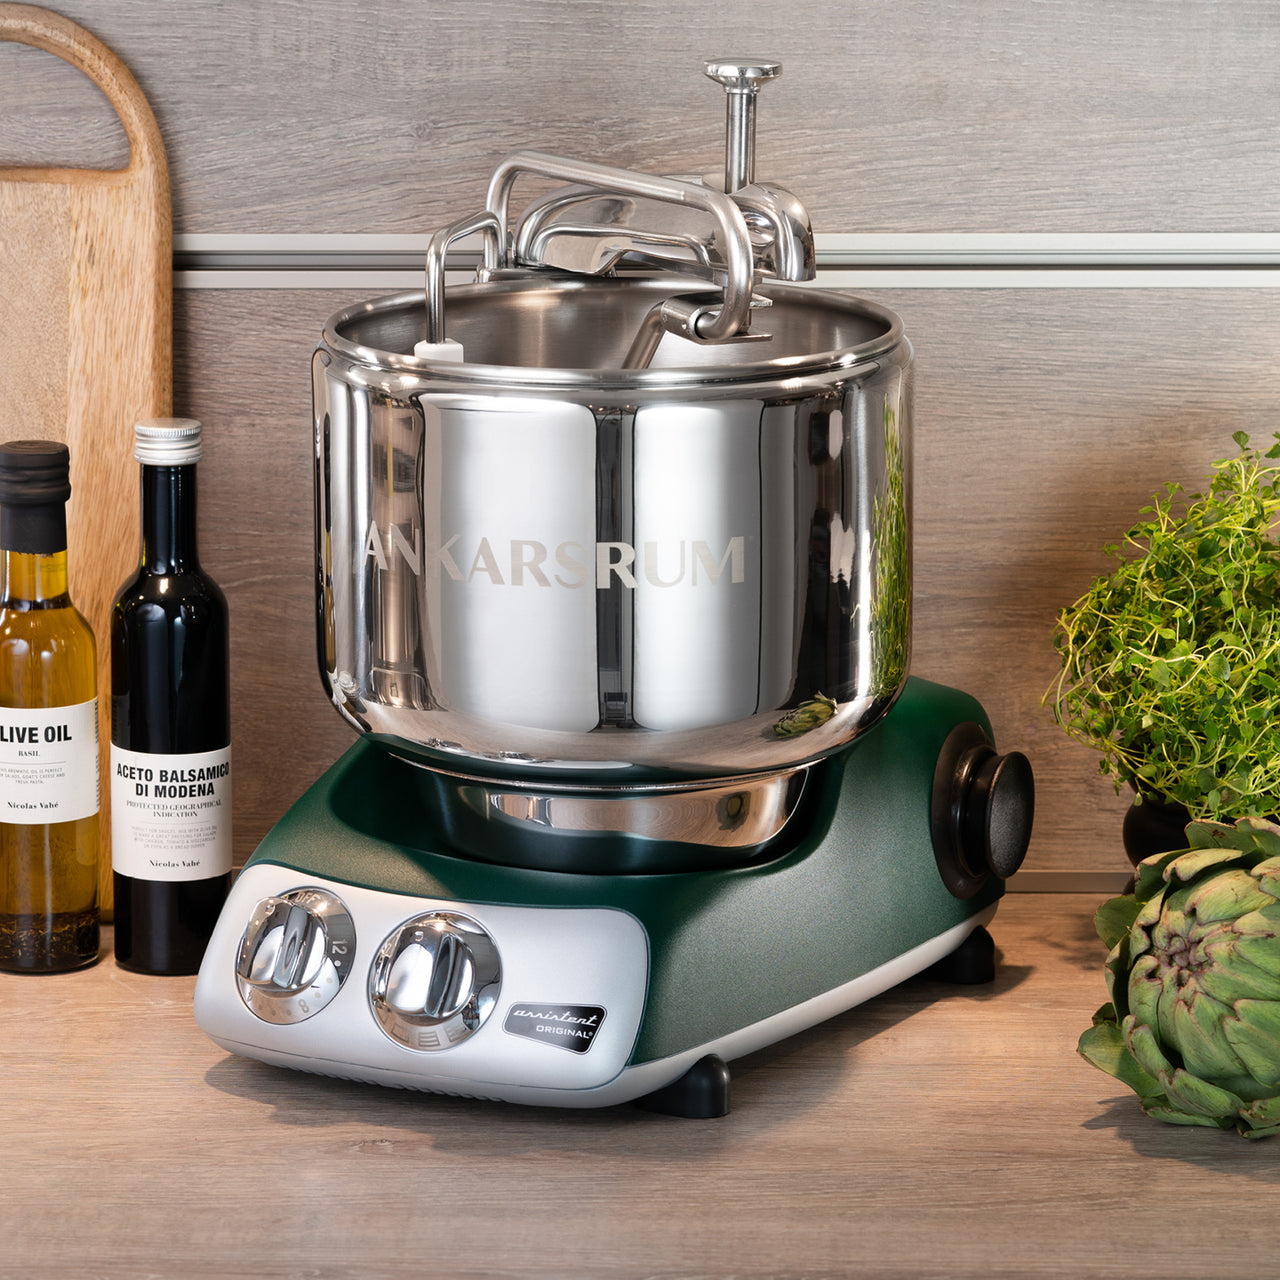 Ankarsrum adds olive green colorway to mixer lineup - Home Furnishings News